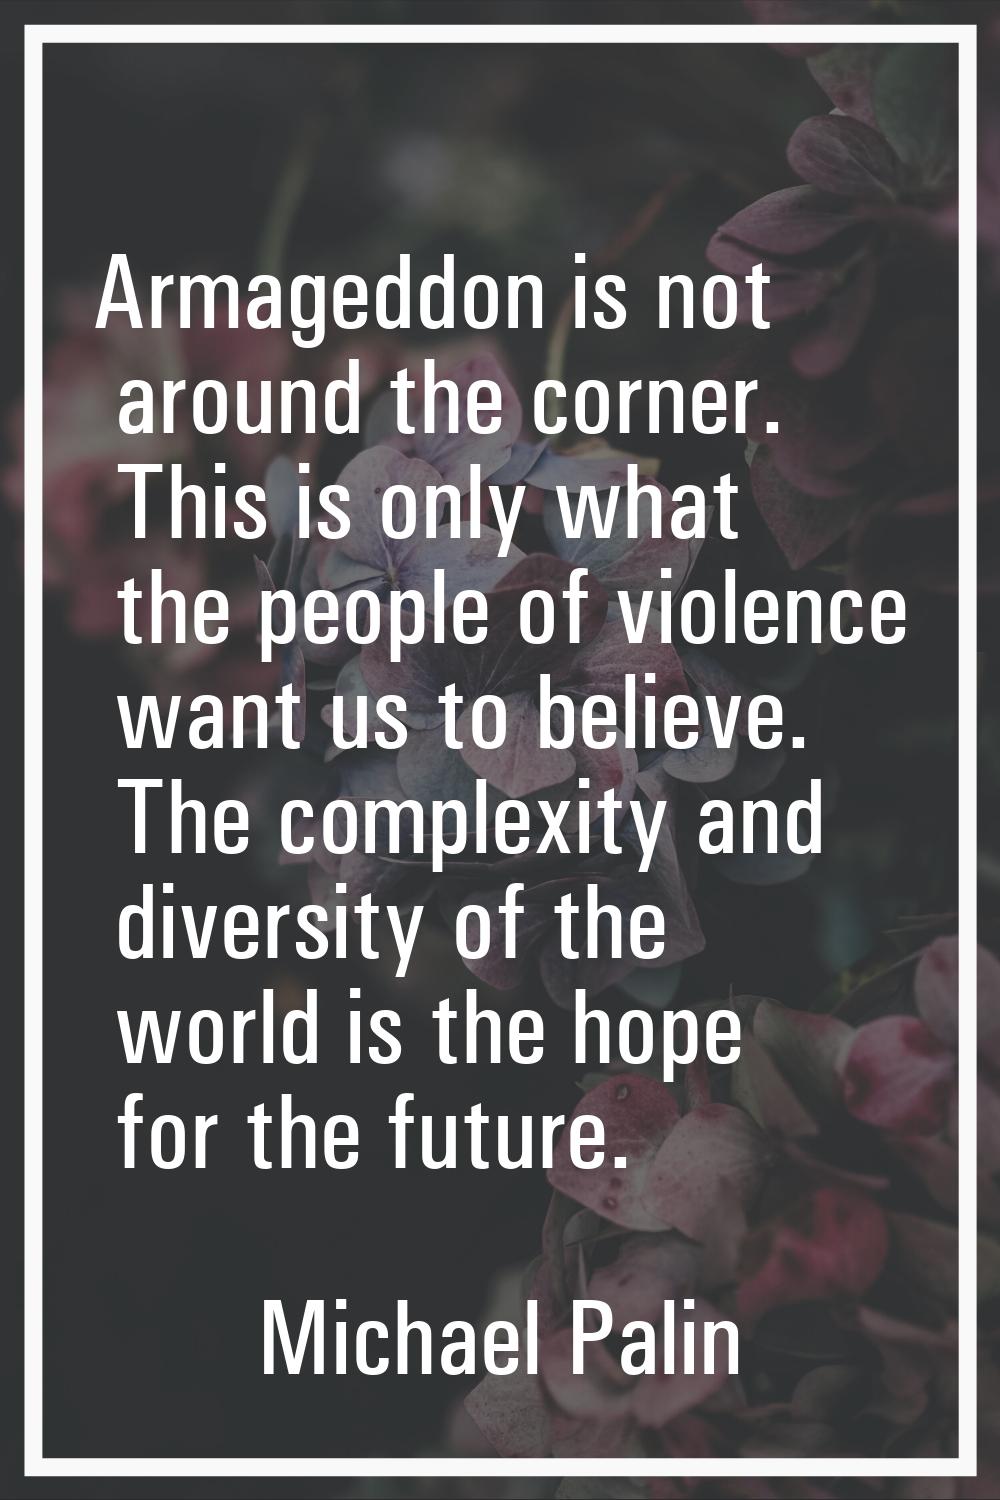 Armageddon is not around the corner. This is only what the people of violence want us to believe. T